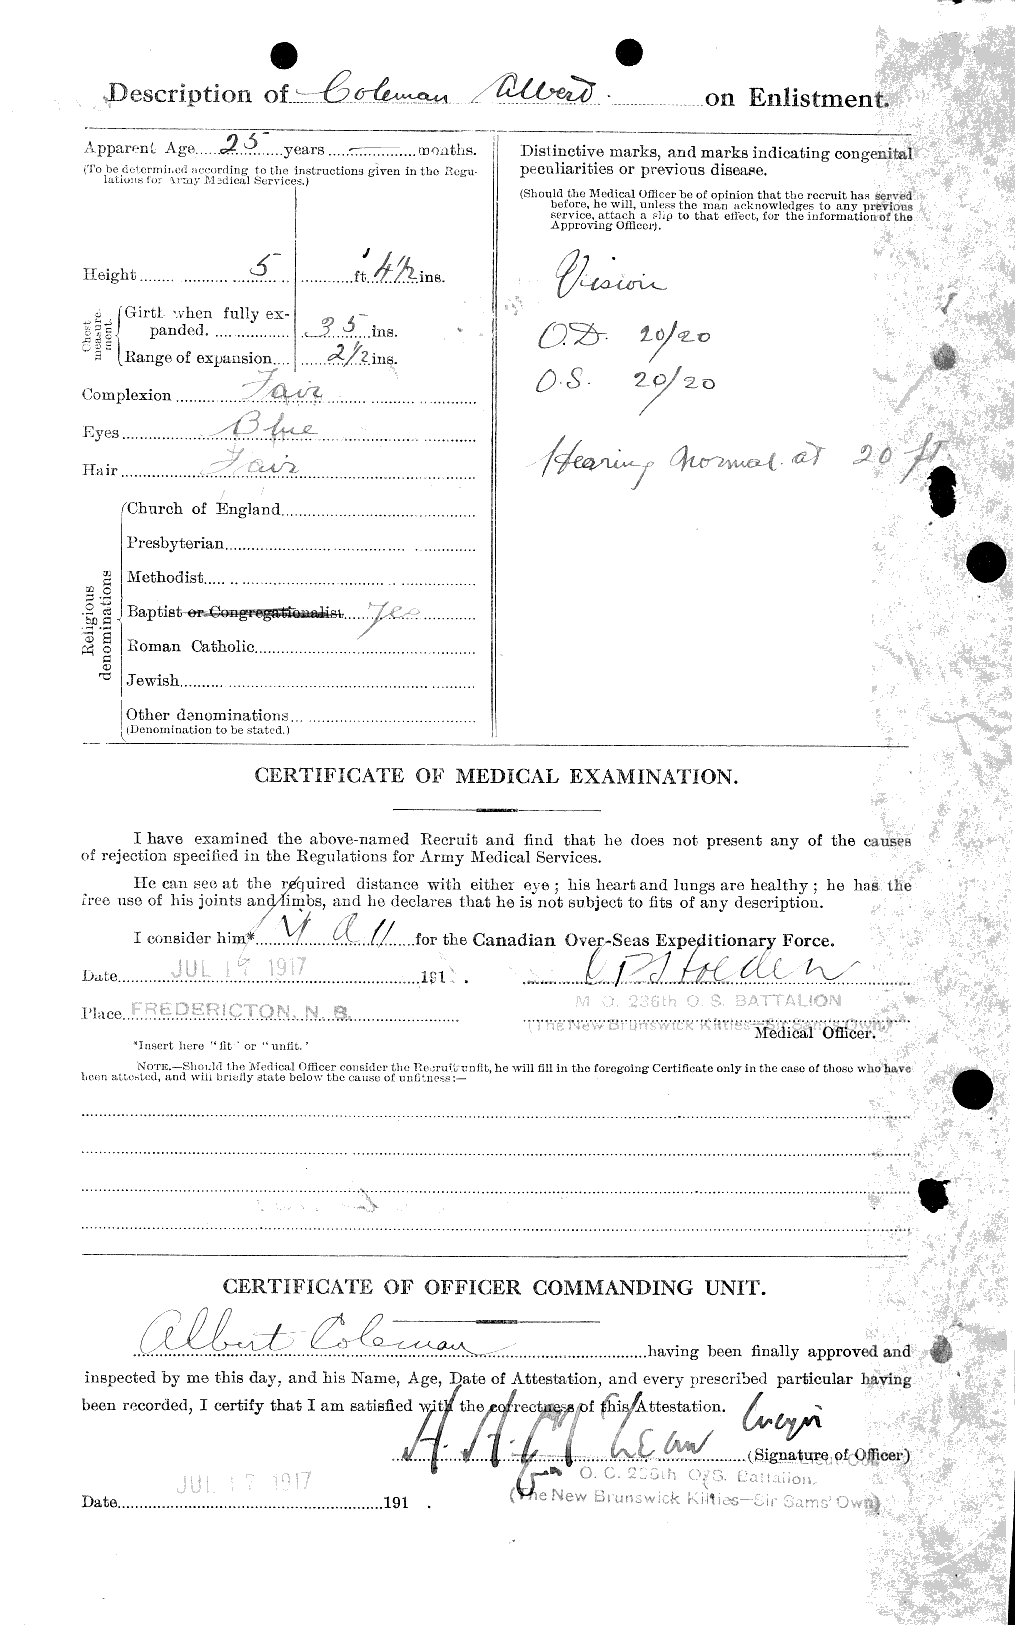 Personnel Records of the First World War - CEF 028051b